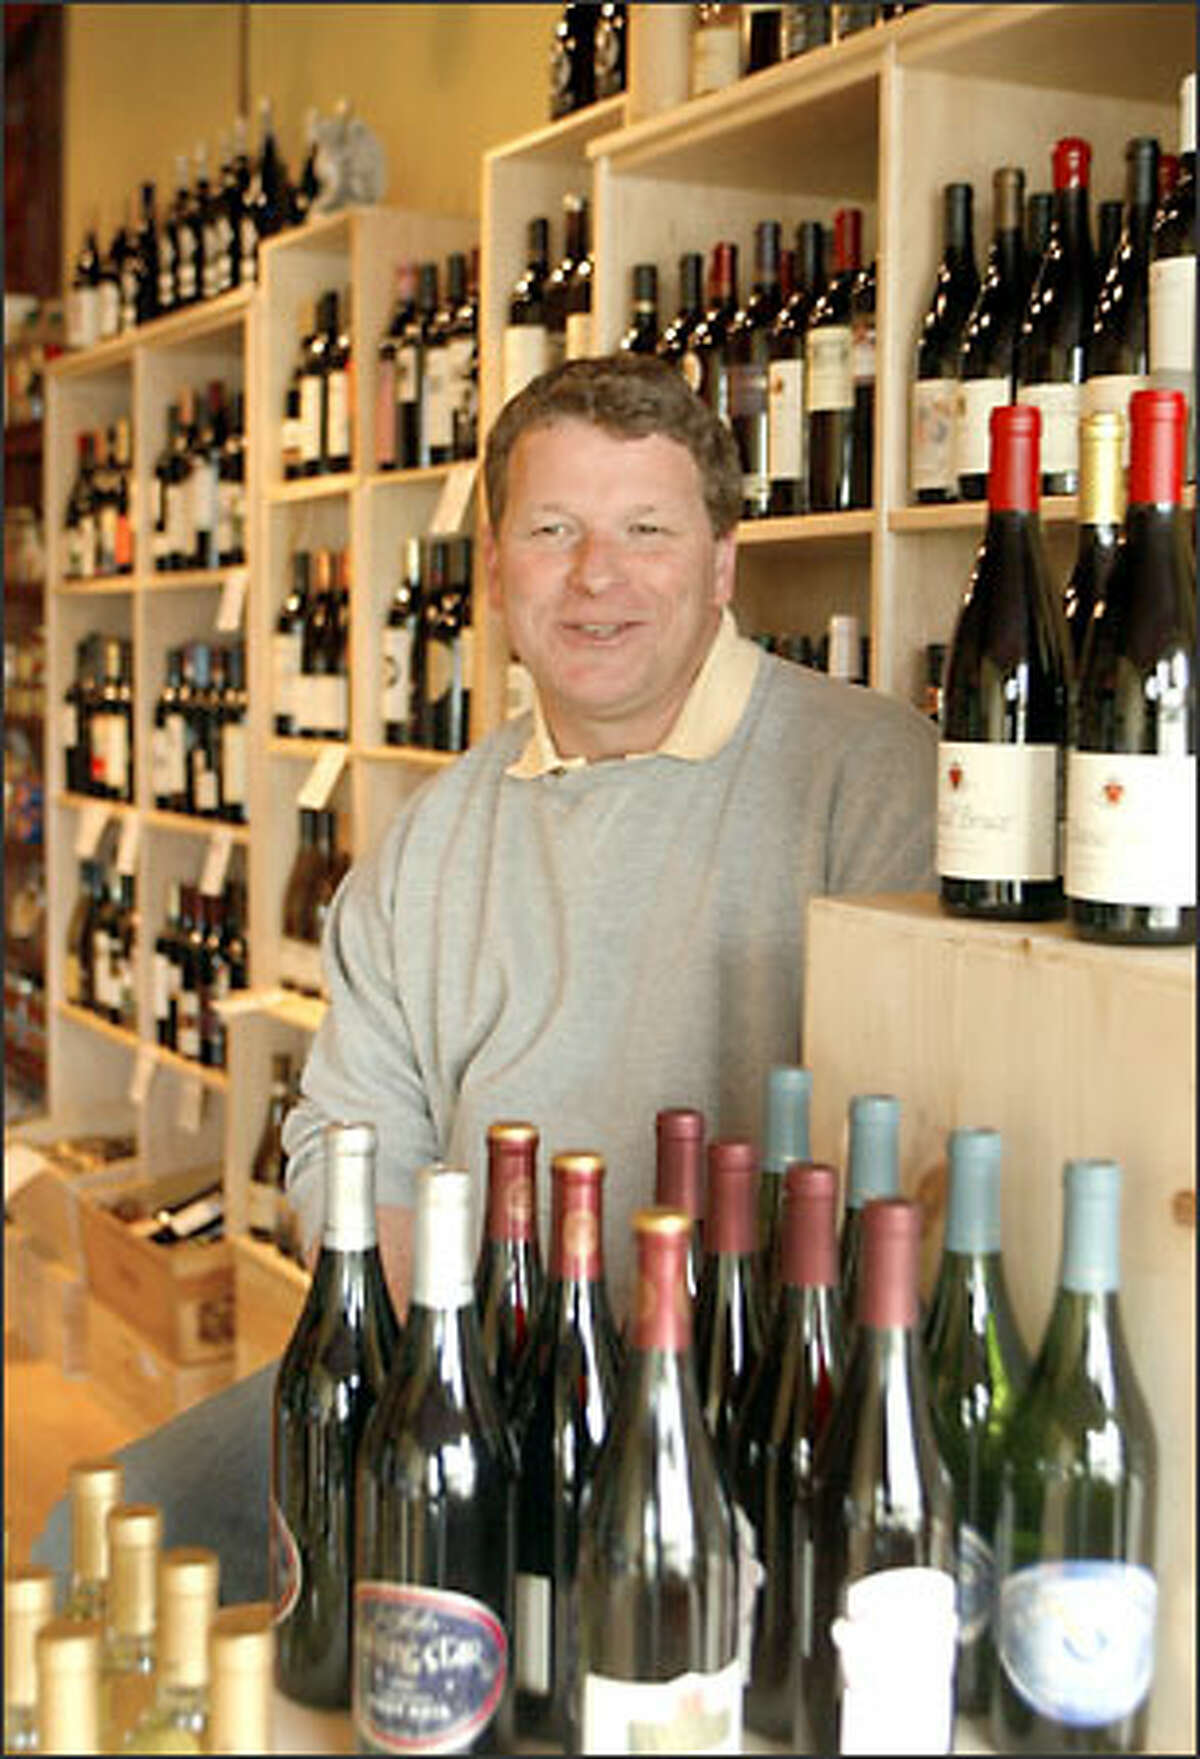 John Mabbott opened The Wine Shop on Twenty Fourth at 5903 24th Ave. N.W. near two bakeries.